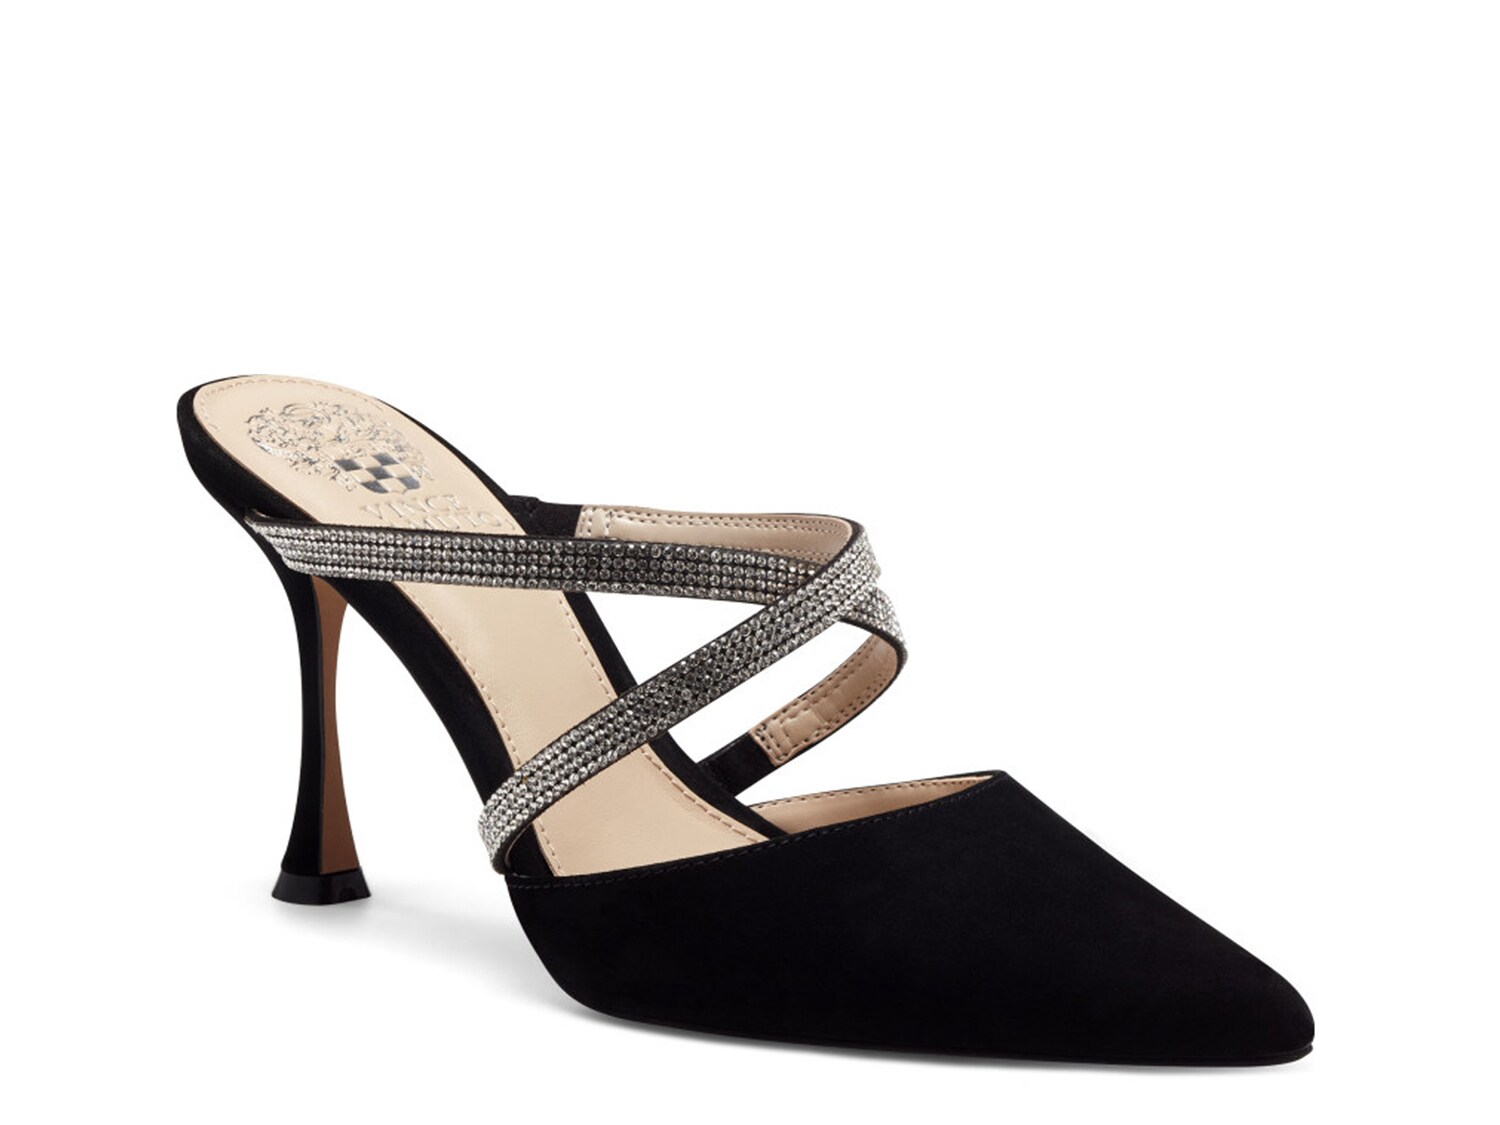 Vince Camuto Citiniy Pump - Free Shipping | DSW